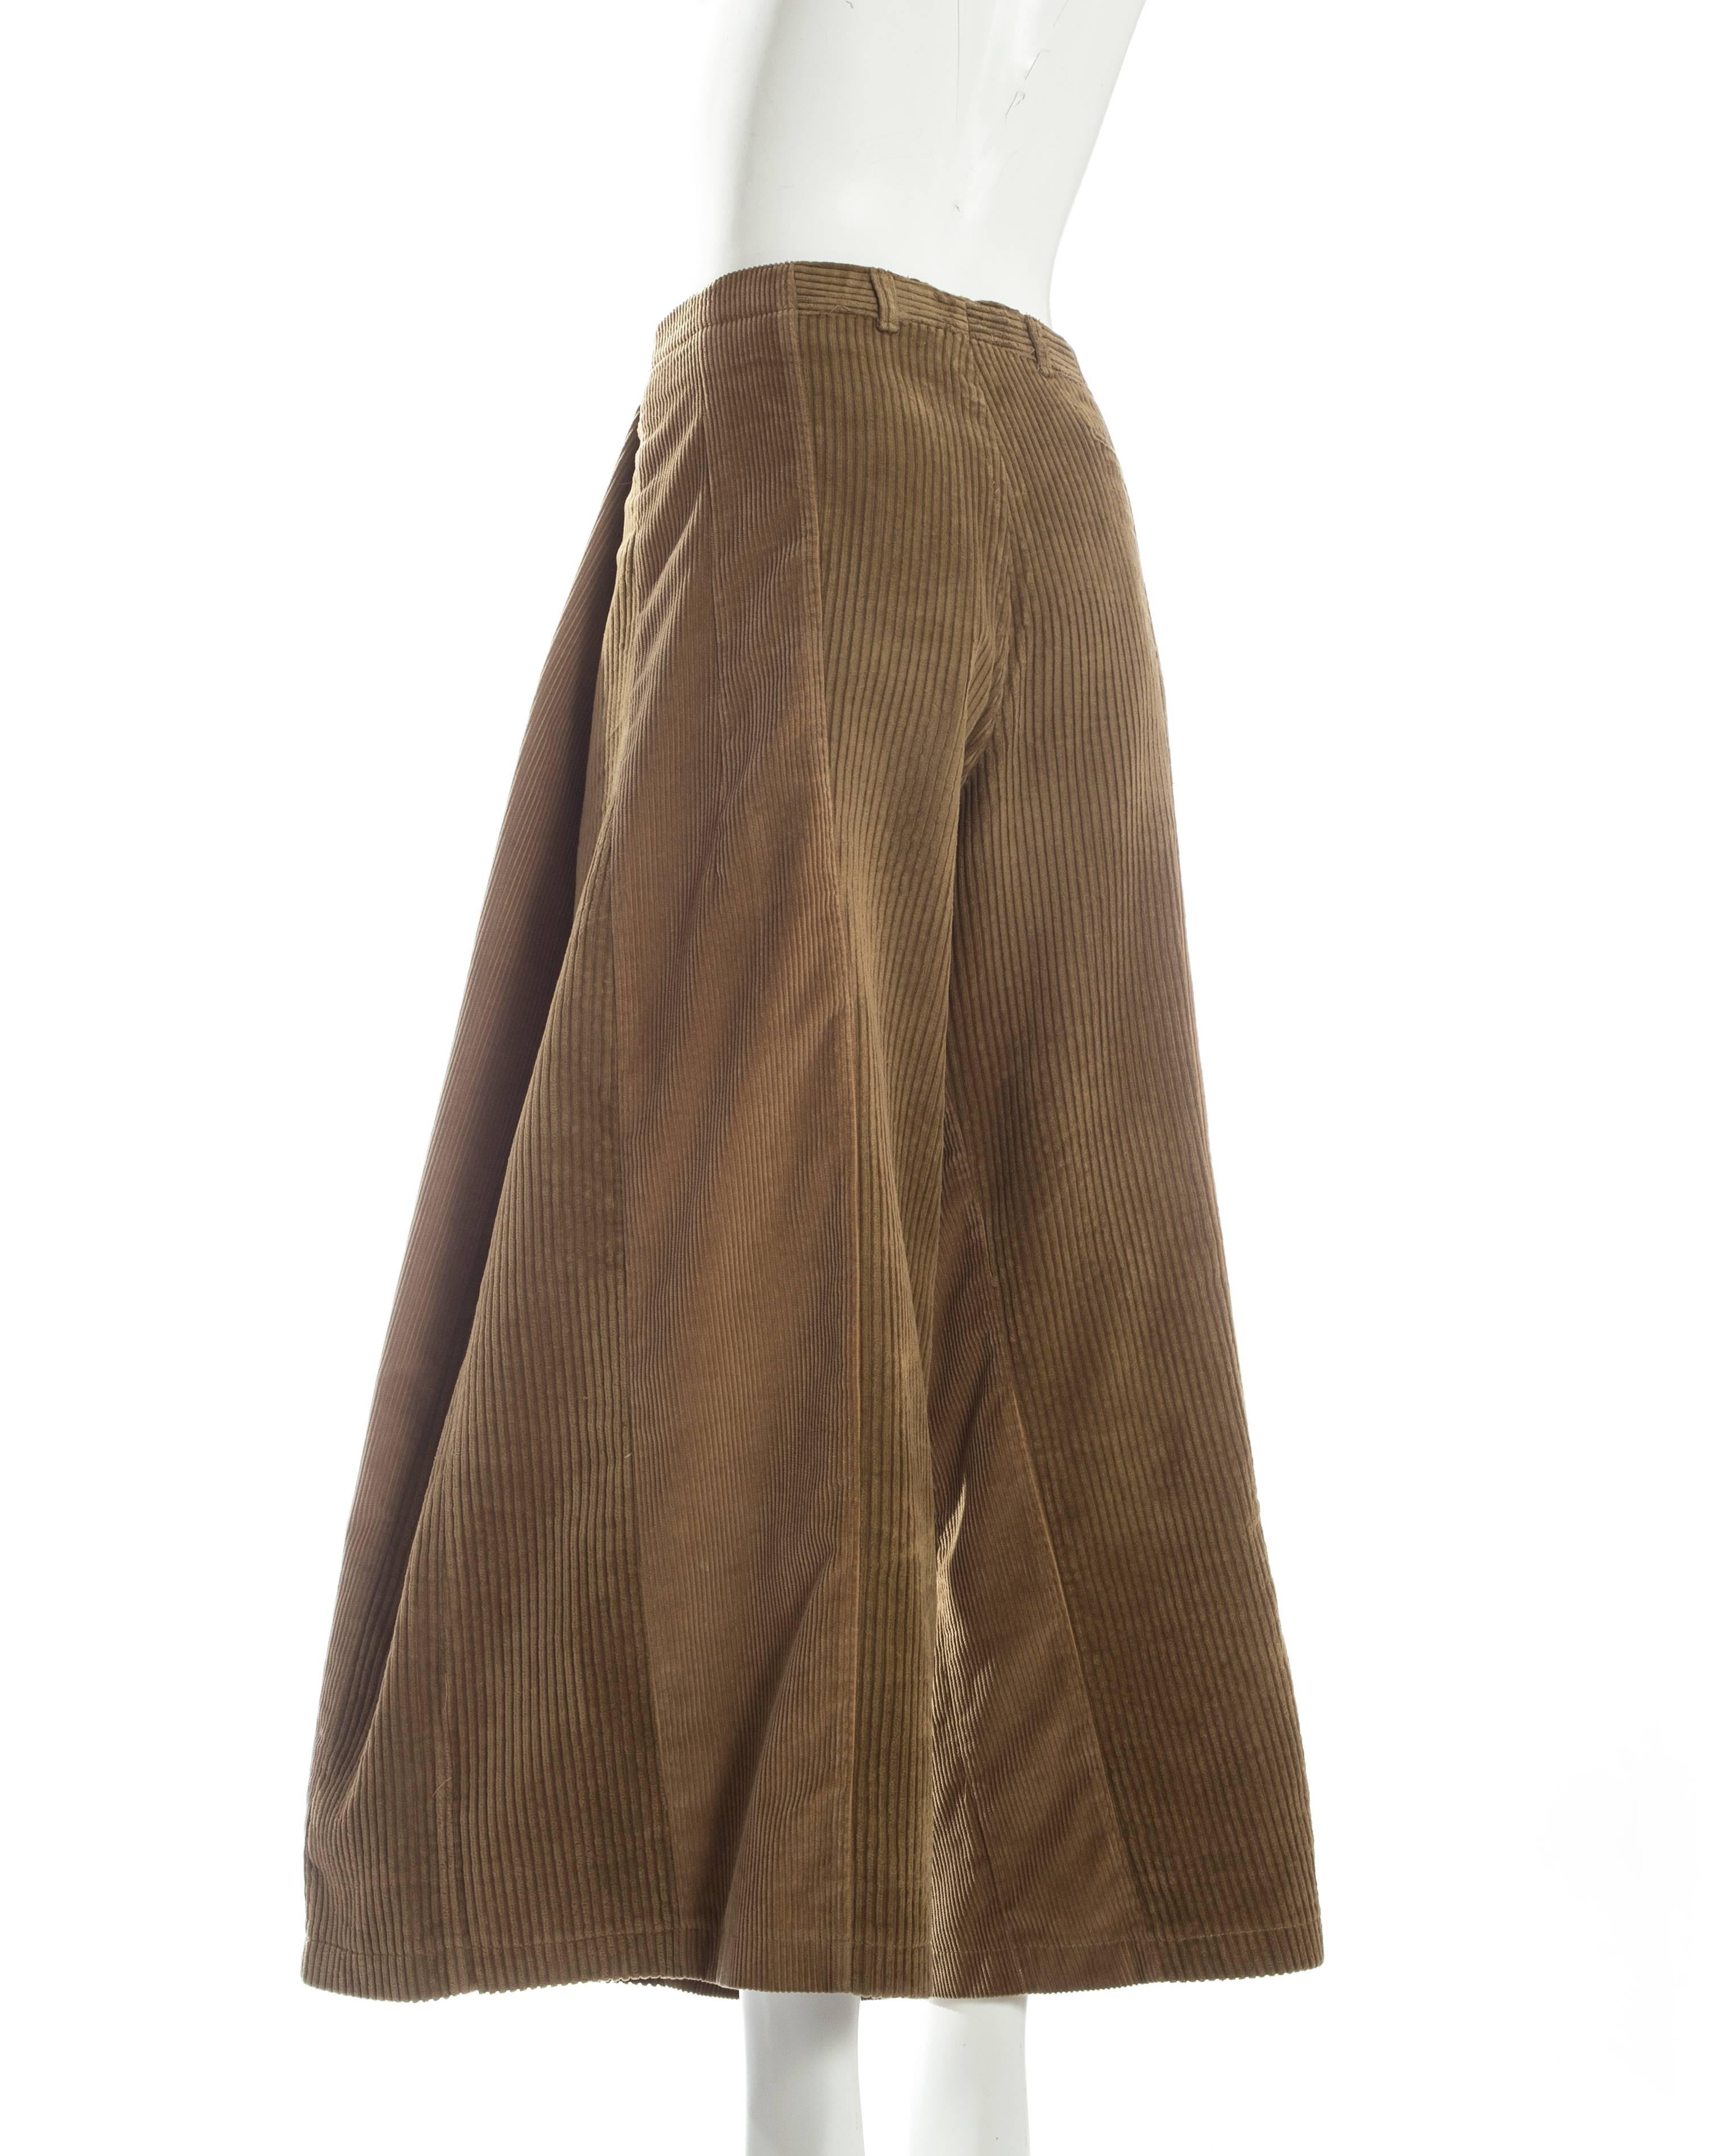 Margiela XXL Oversized pants made from two vintage corduroy pants, ca. 2000-3 2